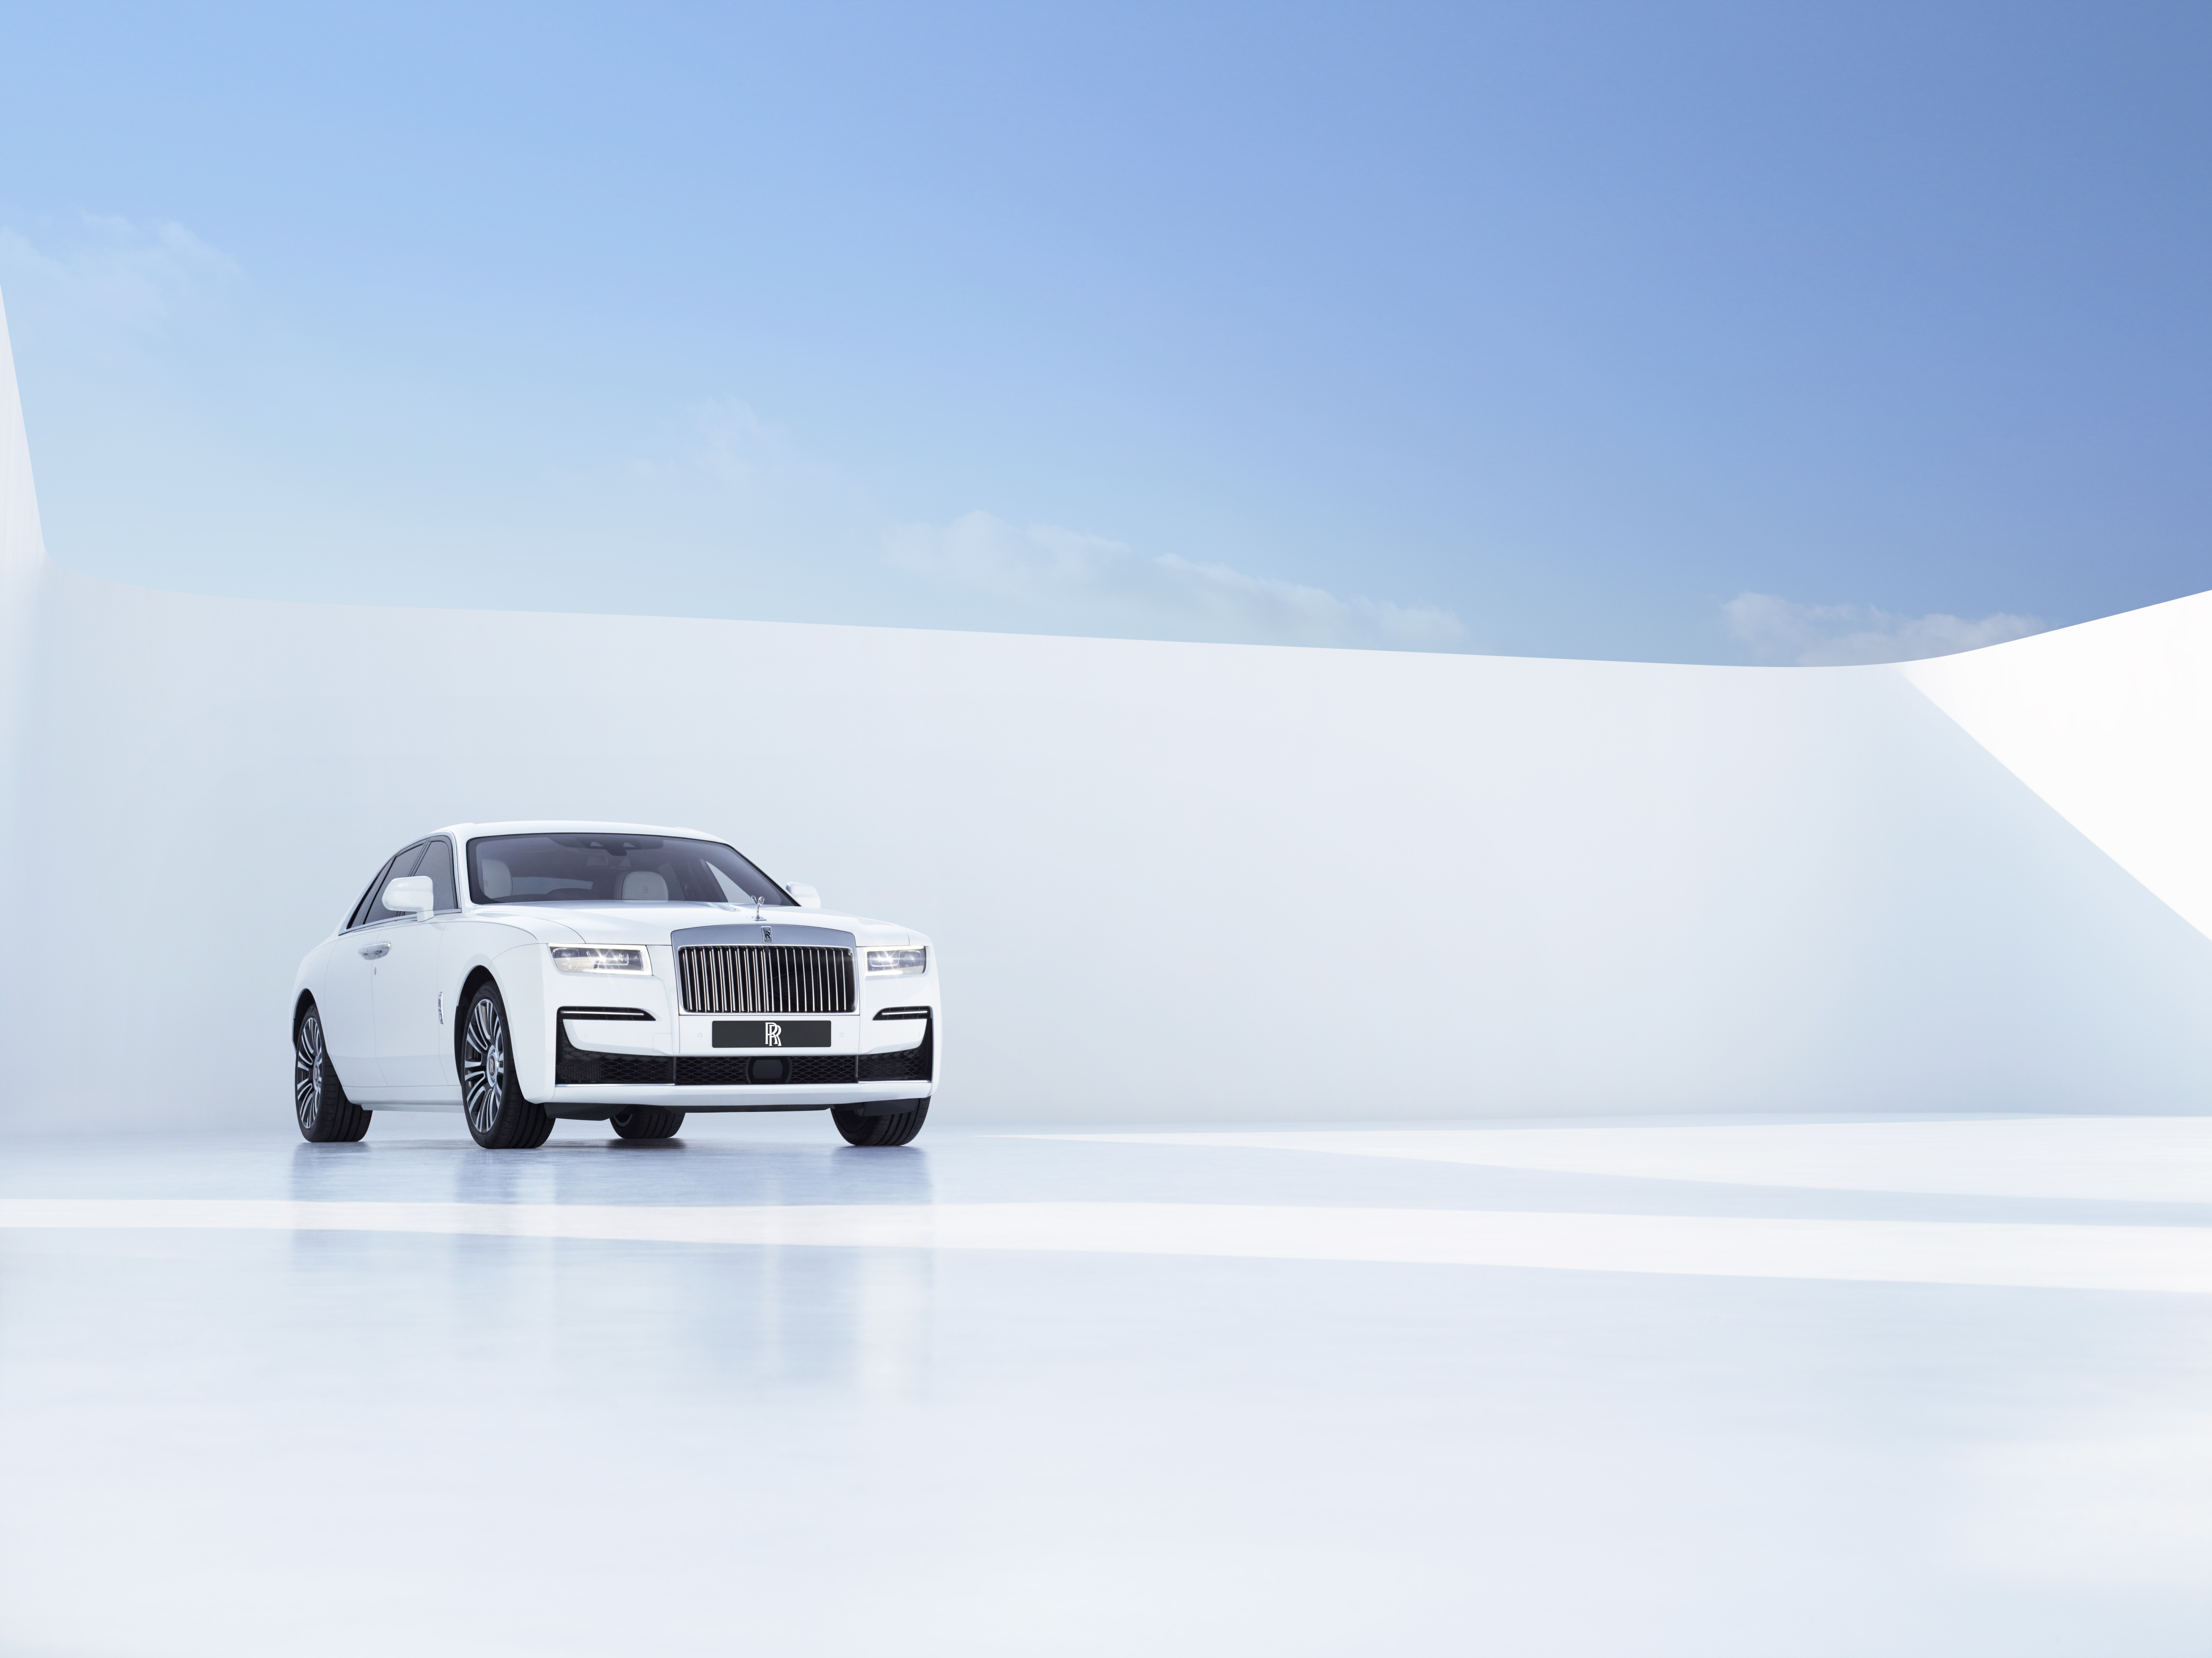 The new Rolls-Royce Ghost: a car for the “post-opulent” generation